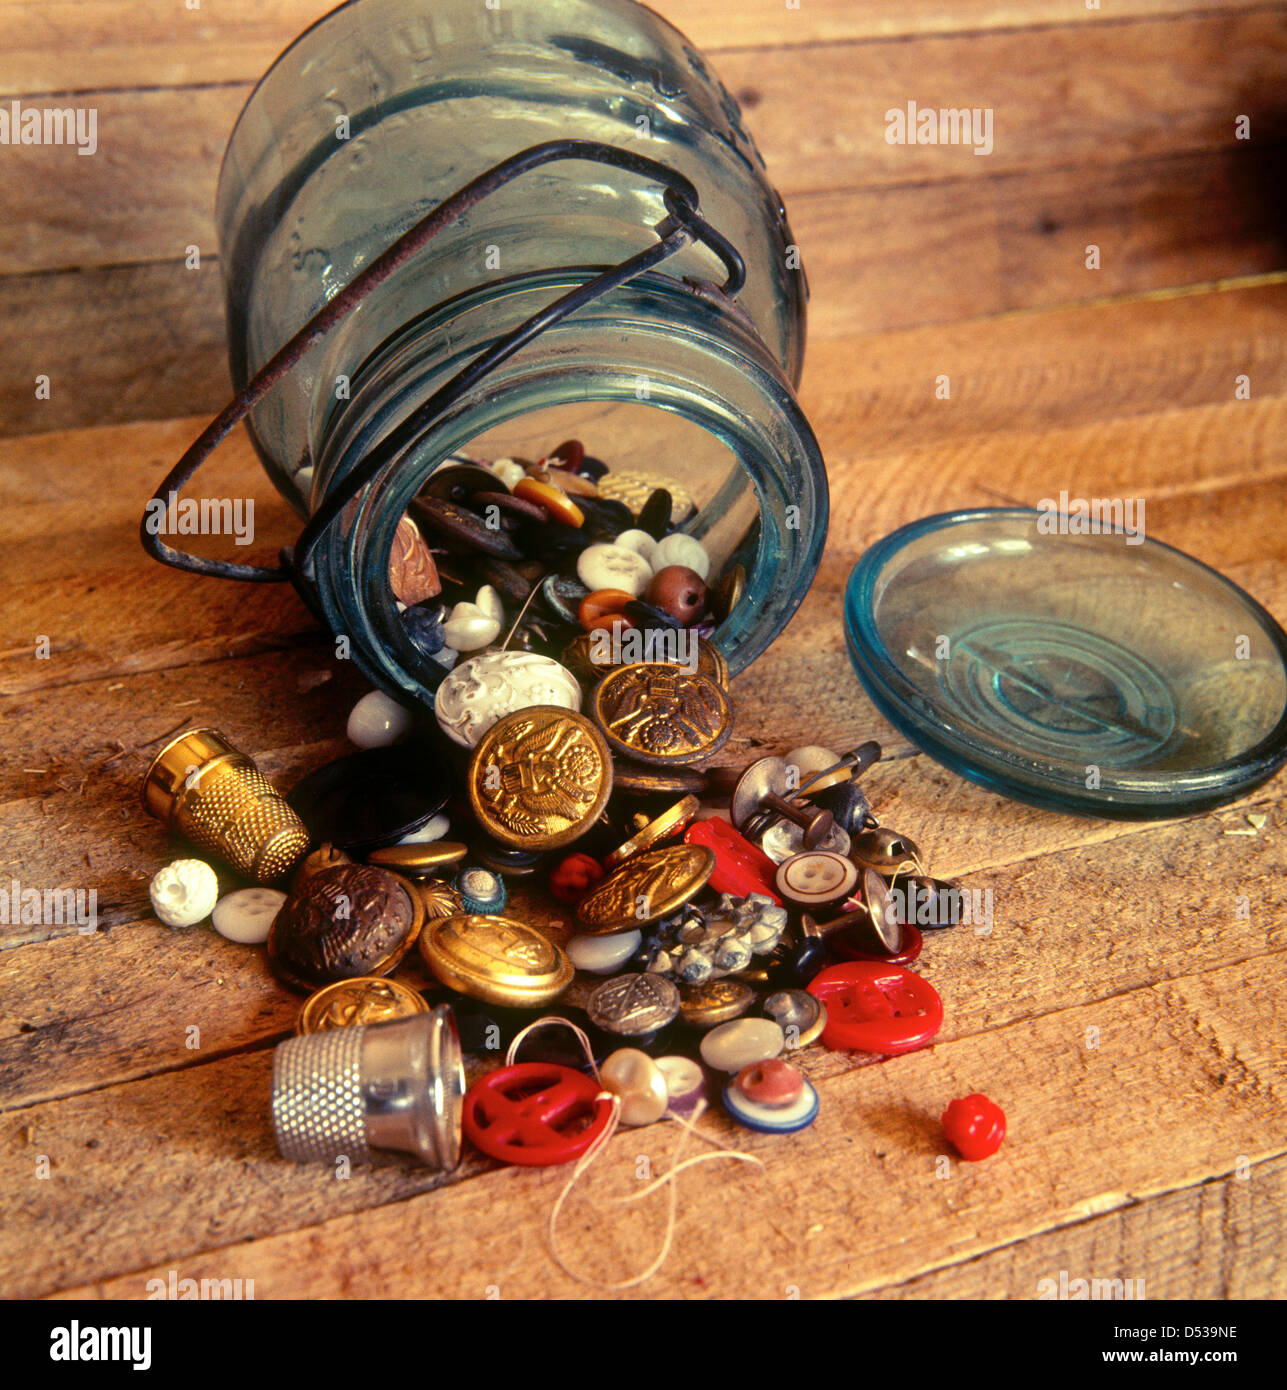 Display of sewing buttons in an old Mason style Jar. Lincoln Nebraska NE USA Stock Photo